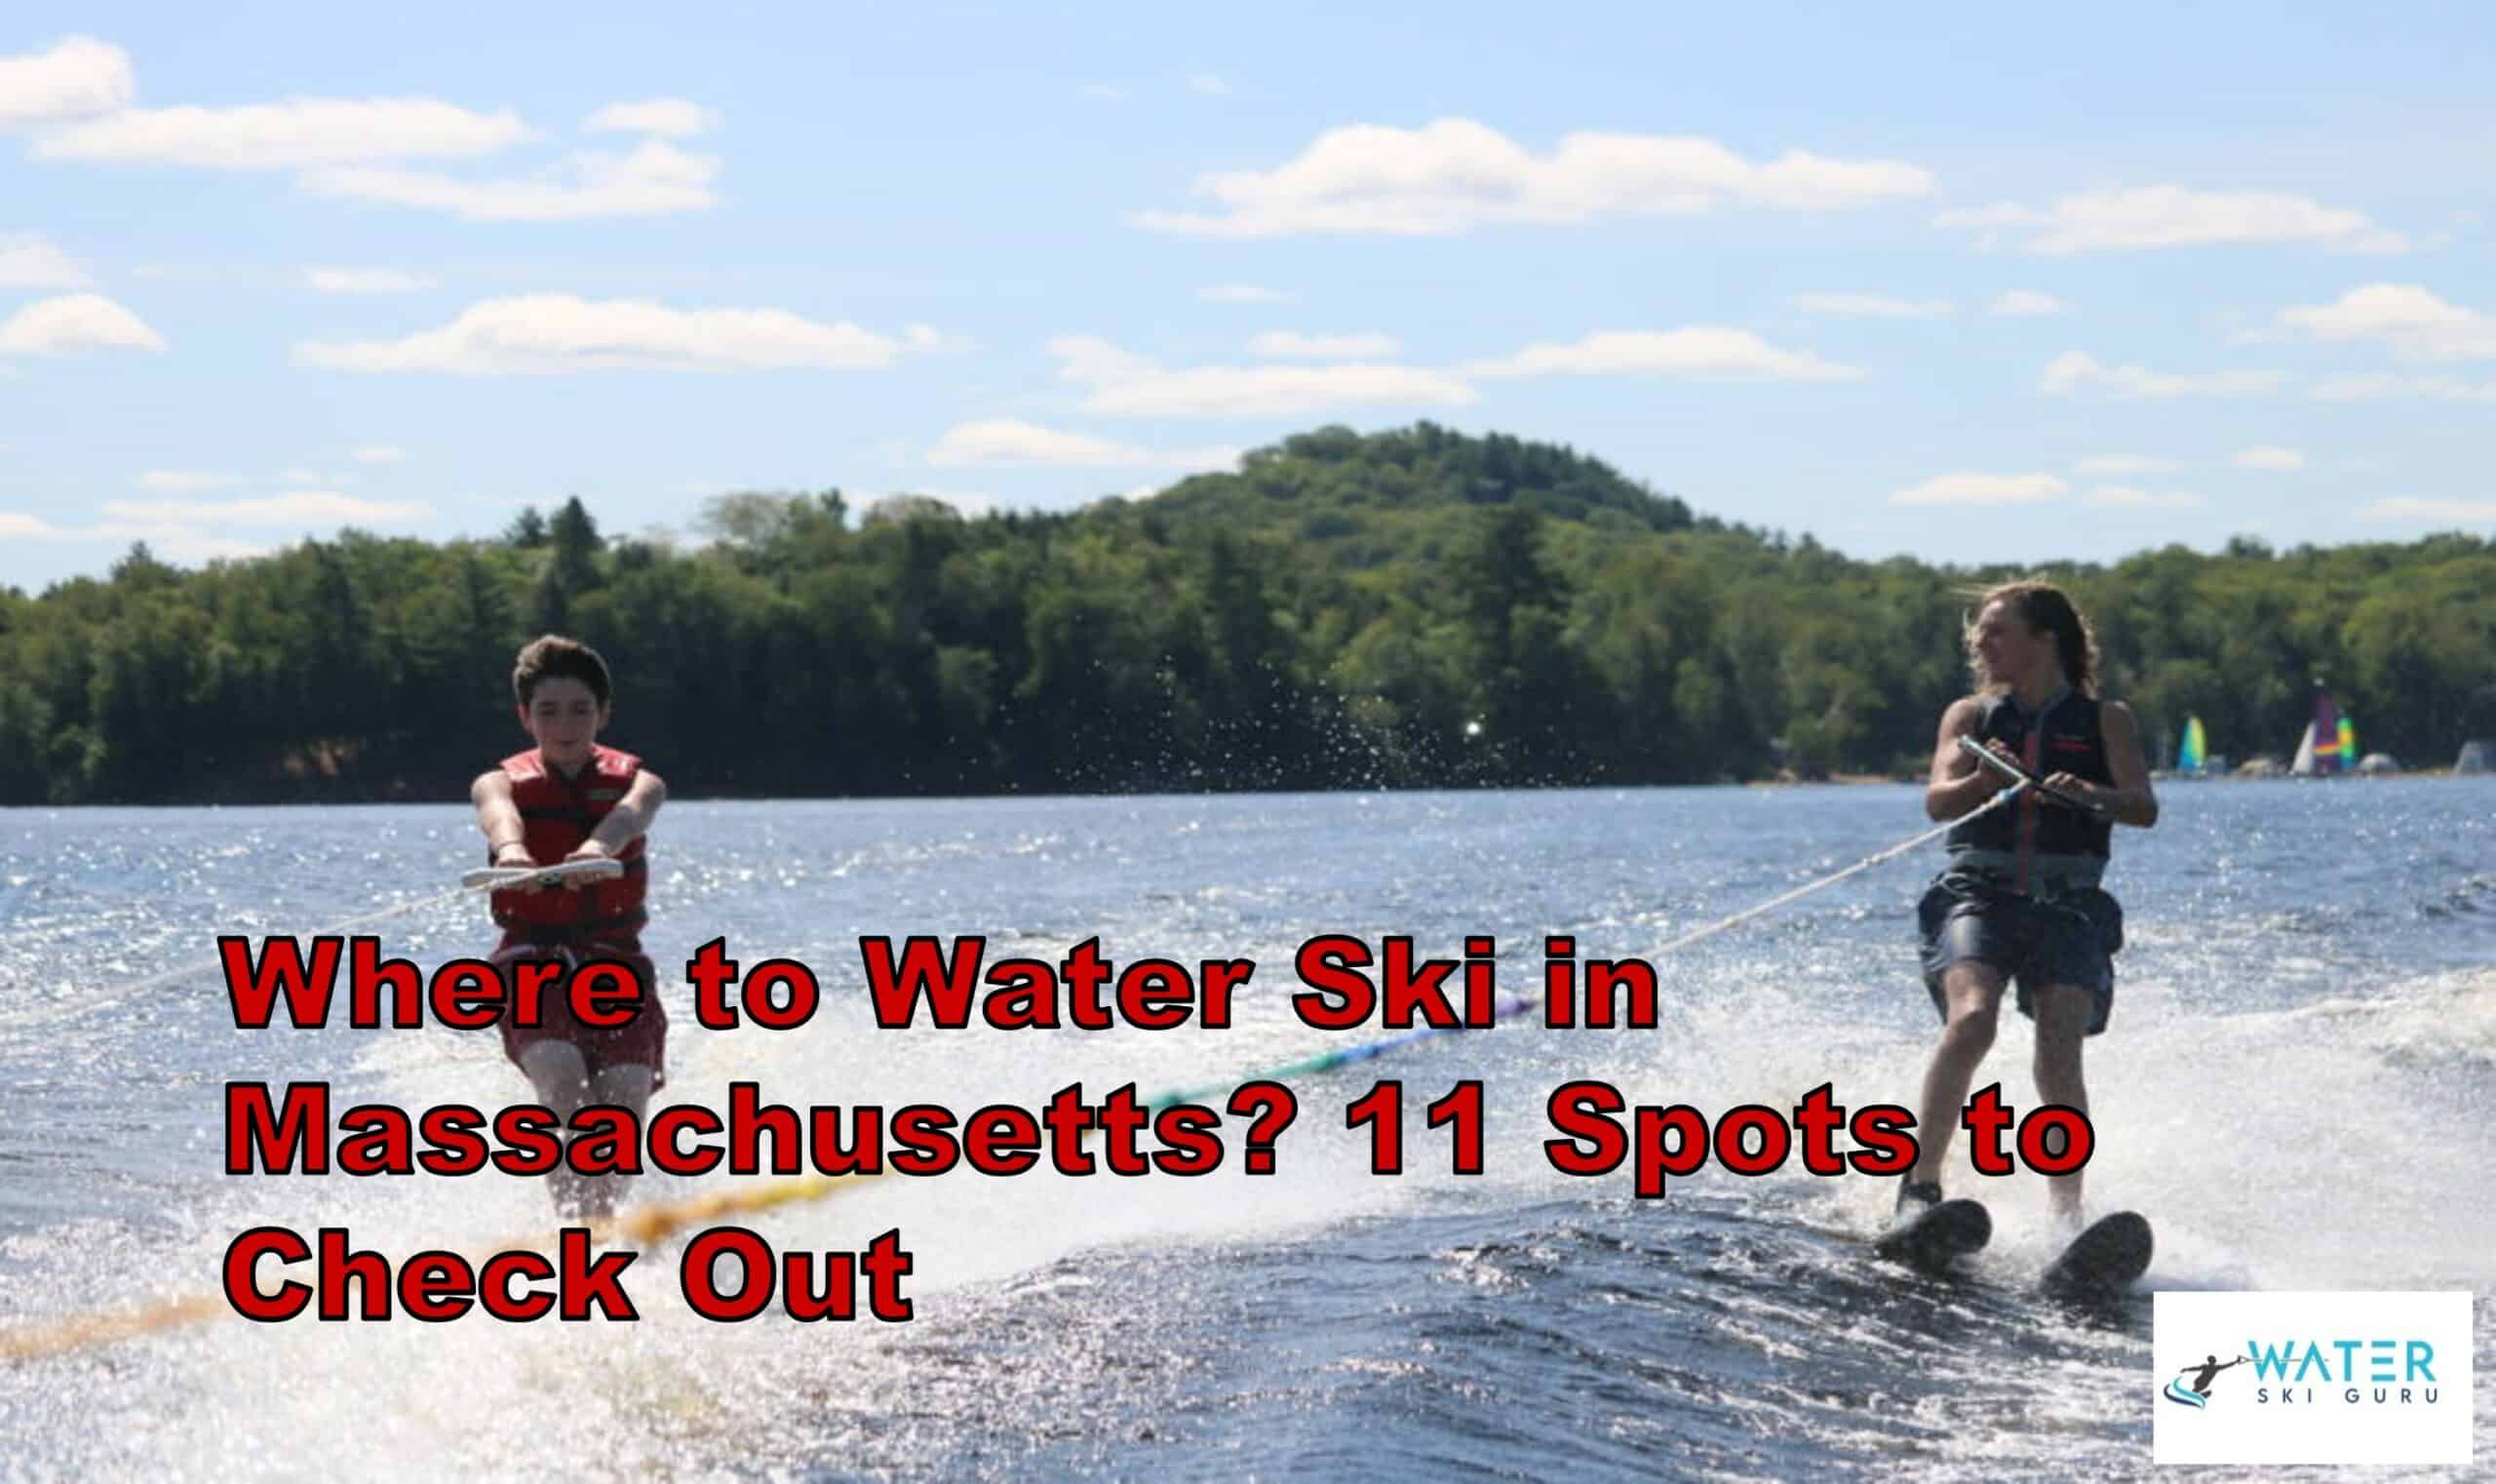 Where to Water Ski in Massachusetts 11 Spots to Check Out